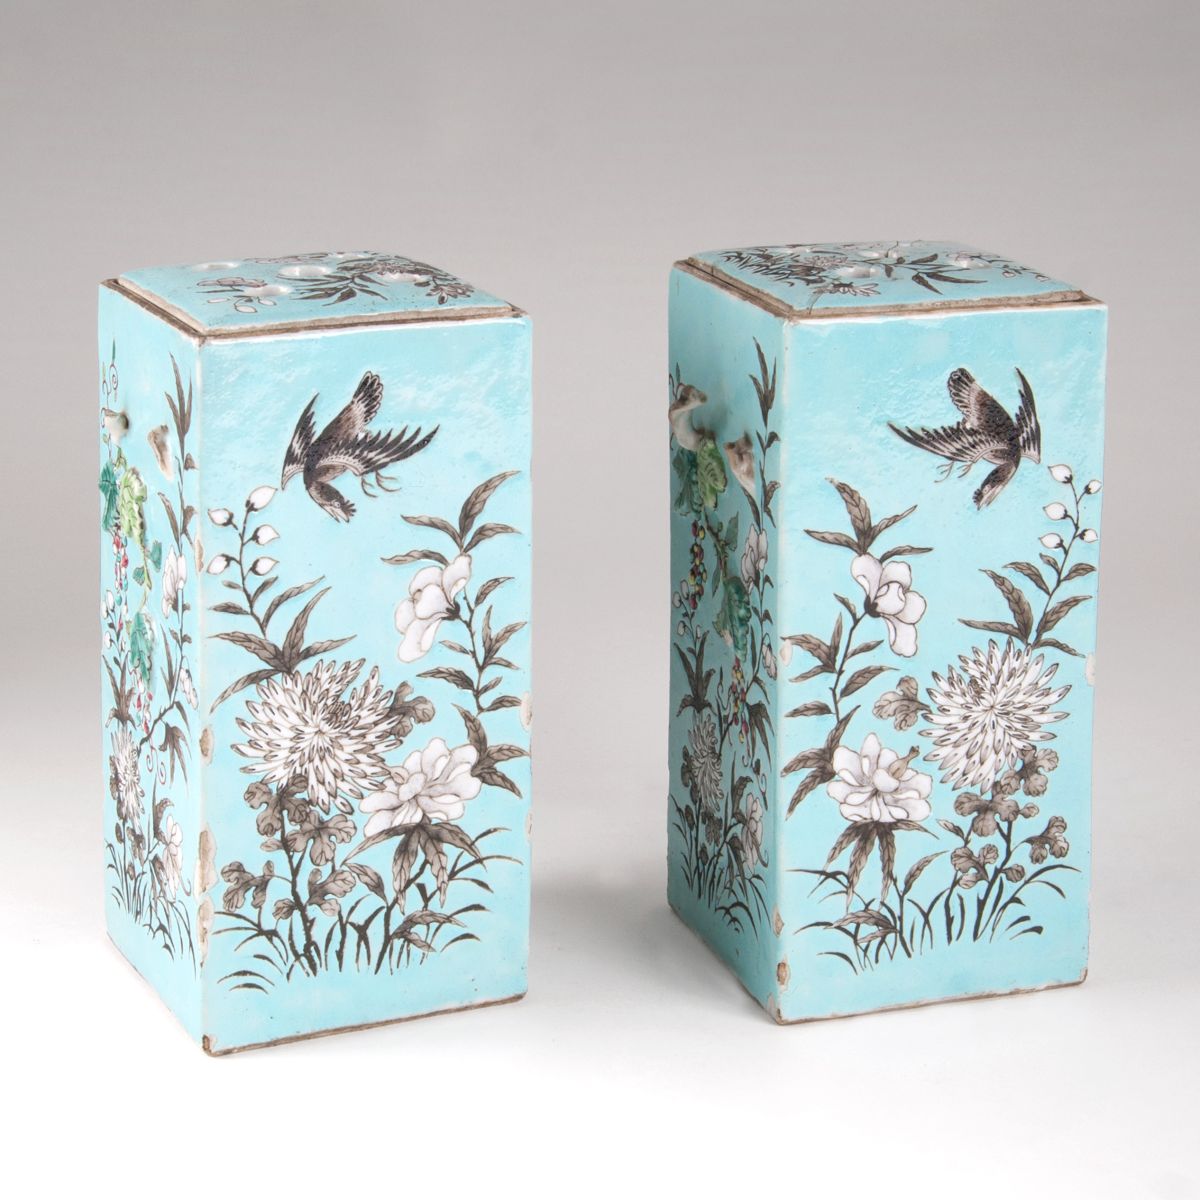 A pair of square-cut vases with branche-shaped handles